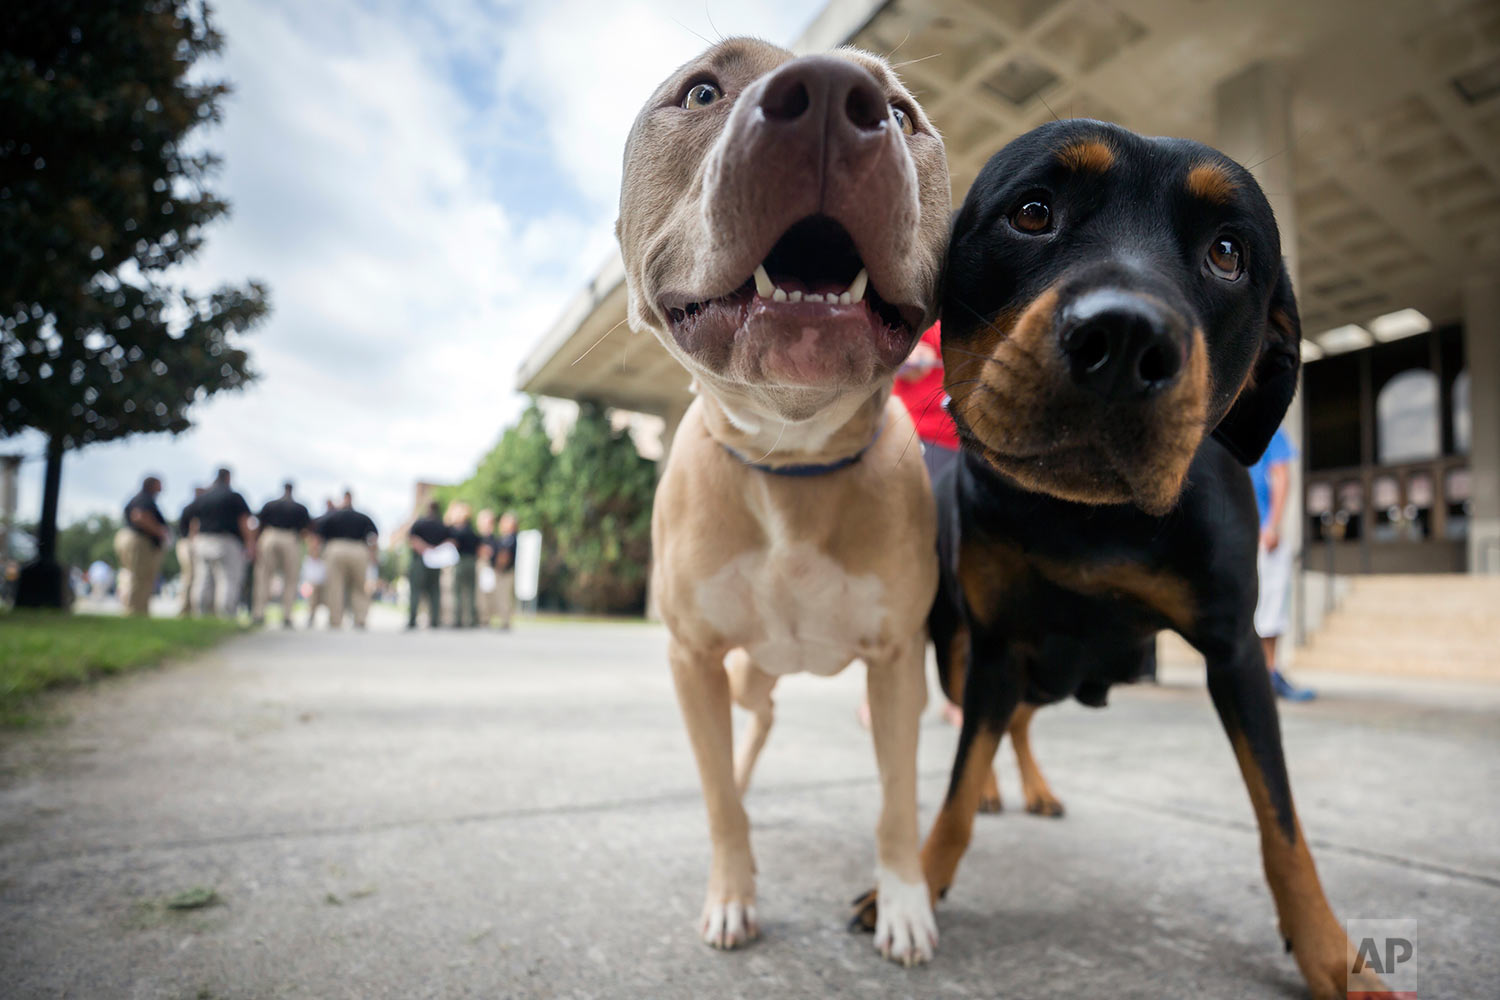  Two pet dogs wait while their owner registers them with the pet evacuation team at the Savannah Civic Center, Saturday, Sept., 9, 2017 in Savannah, Ga. (AP Photo/Stephen B. Morton) 